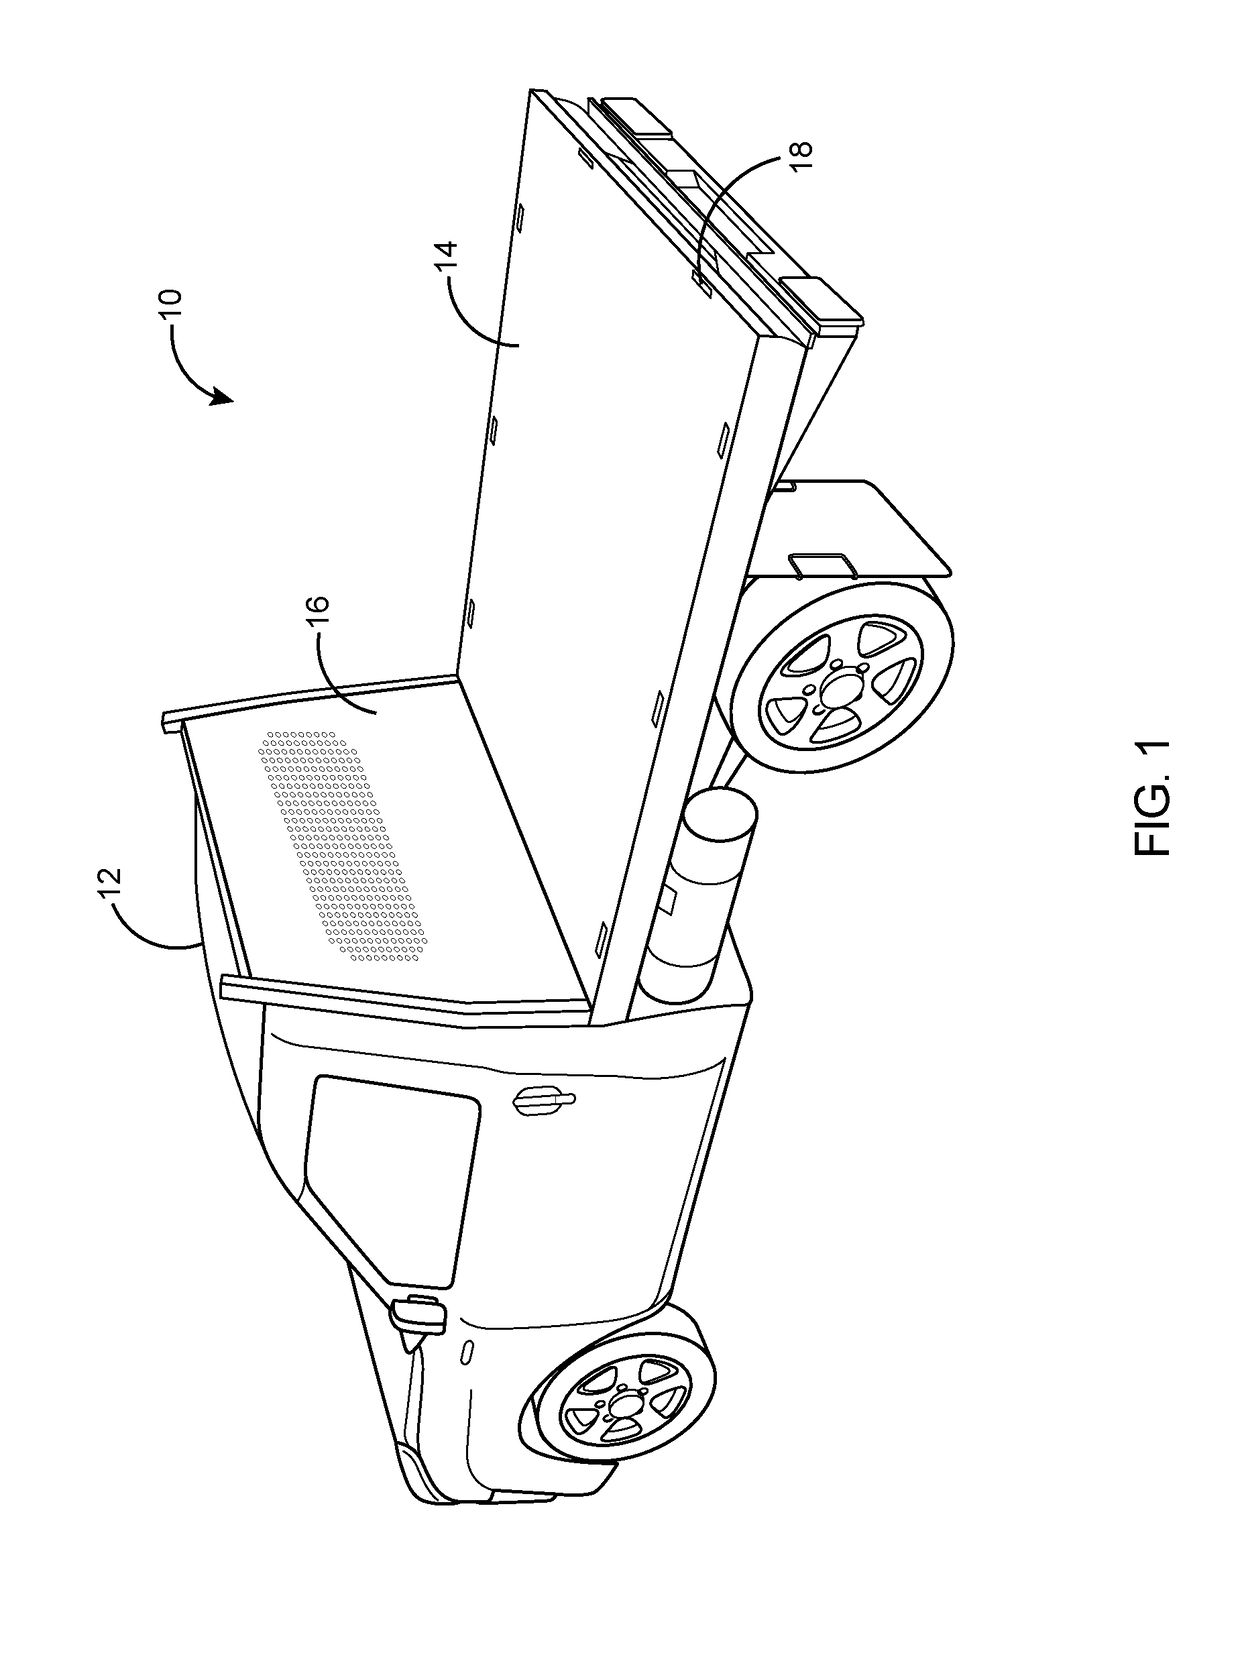 Methods and apparatus for converting a flatbed truck body into a dropside body